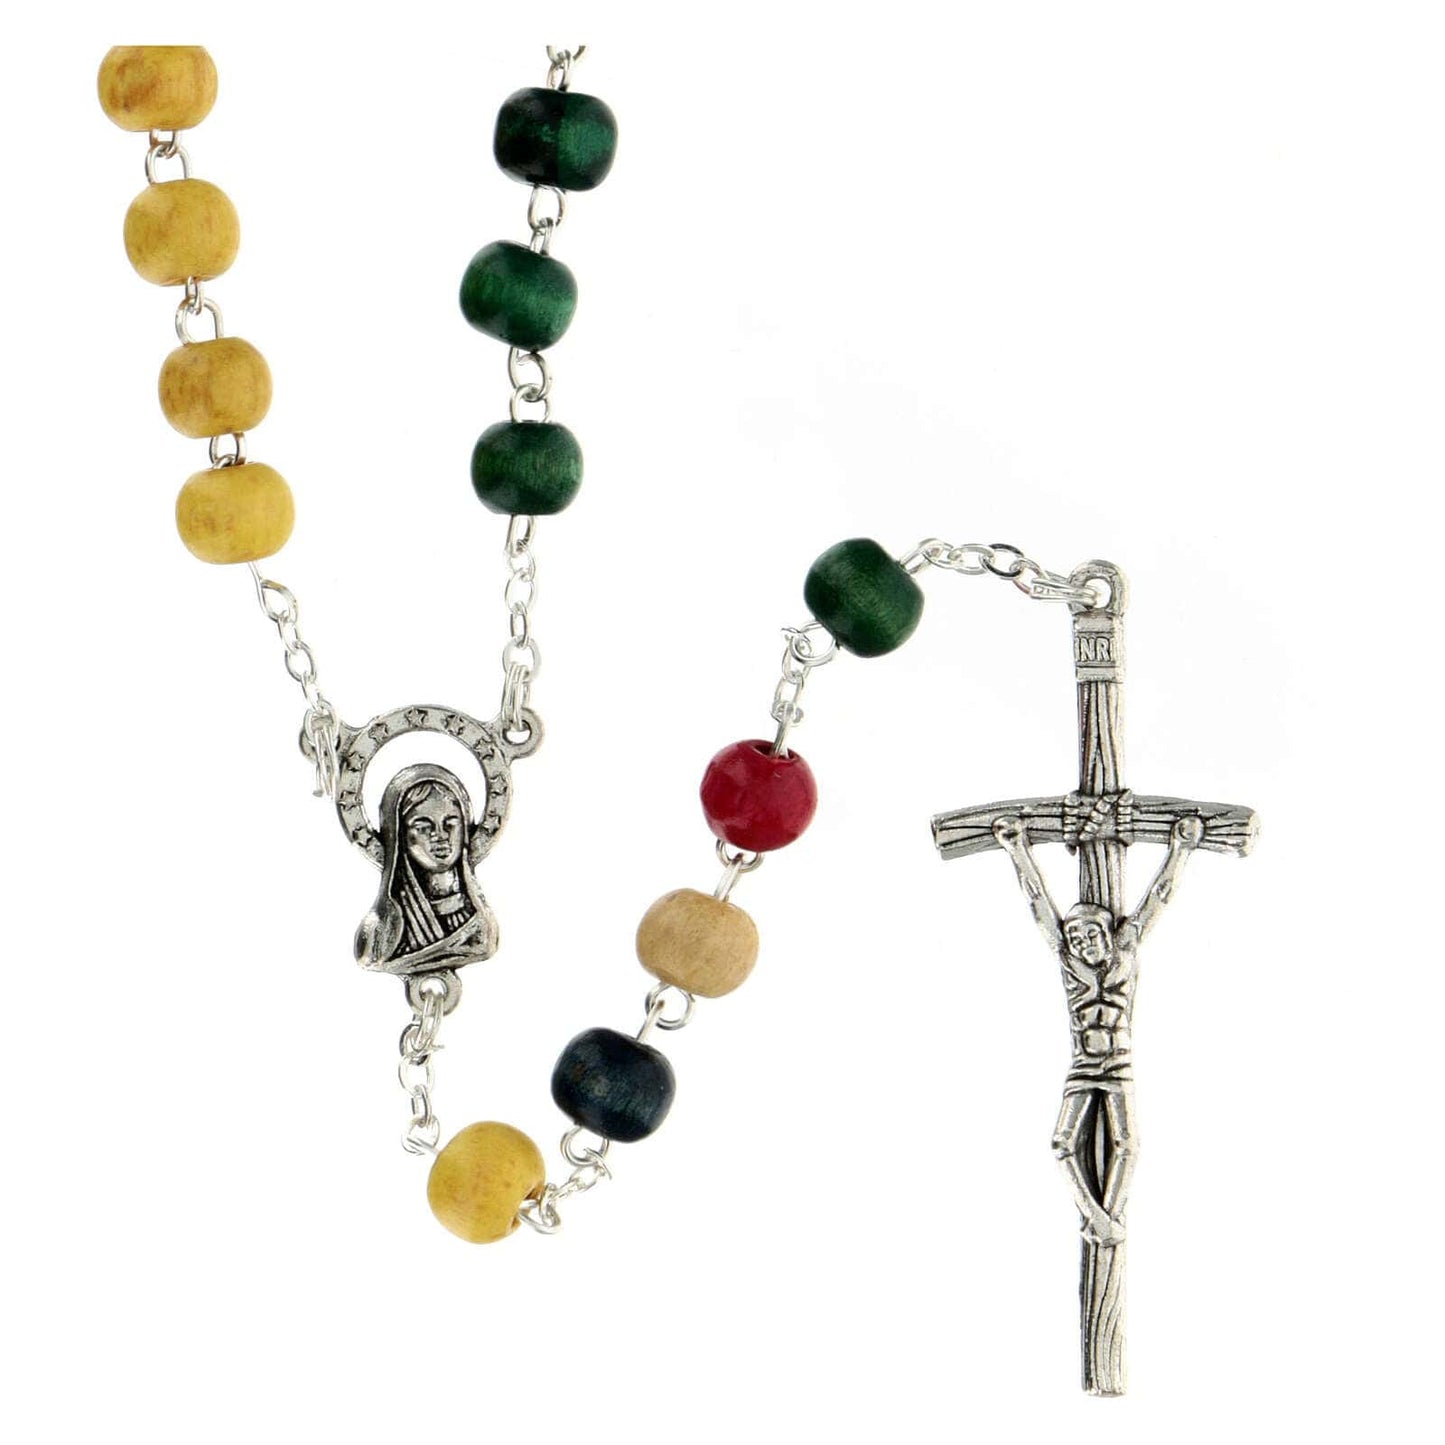 Catholically Rosaries World Mission Catholic - Missionary Wooden Rosary Beads - Blessed By Pope